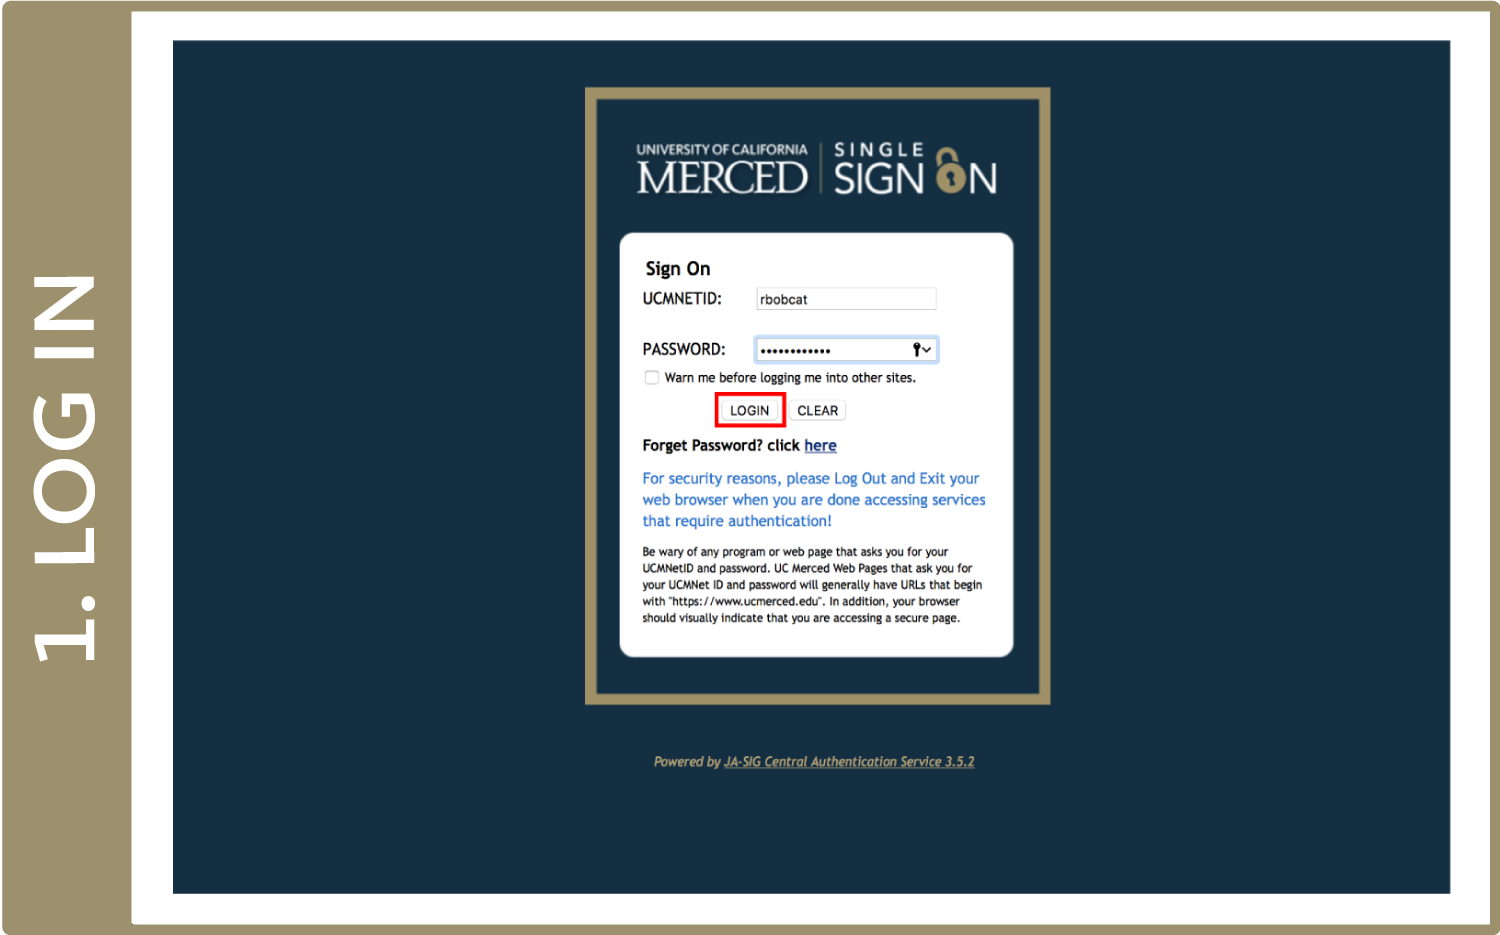 Screenshot of UC Merced Single Sign On page with credentials filled in and a box around "Login" button